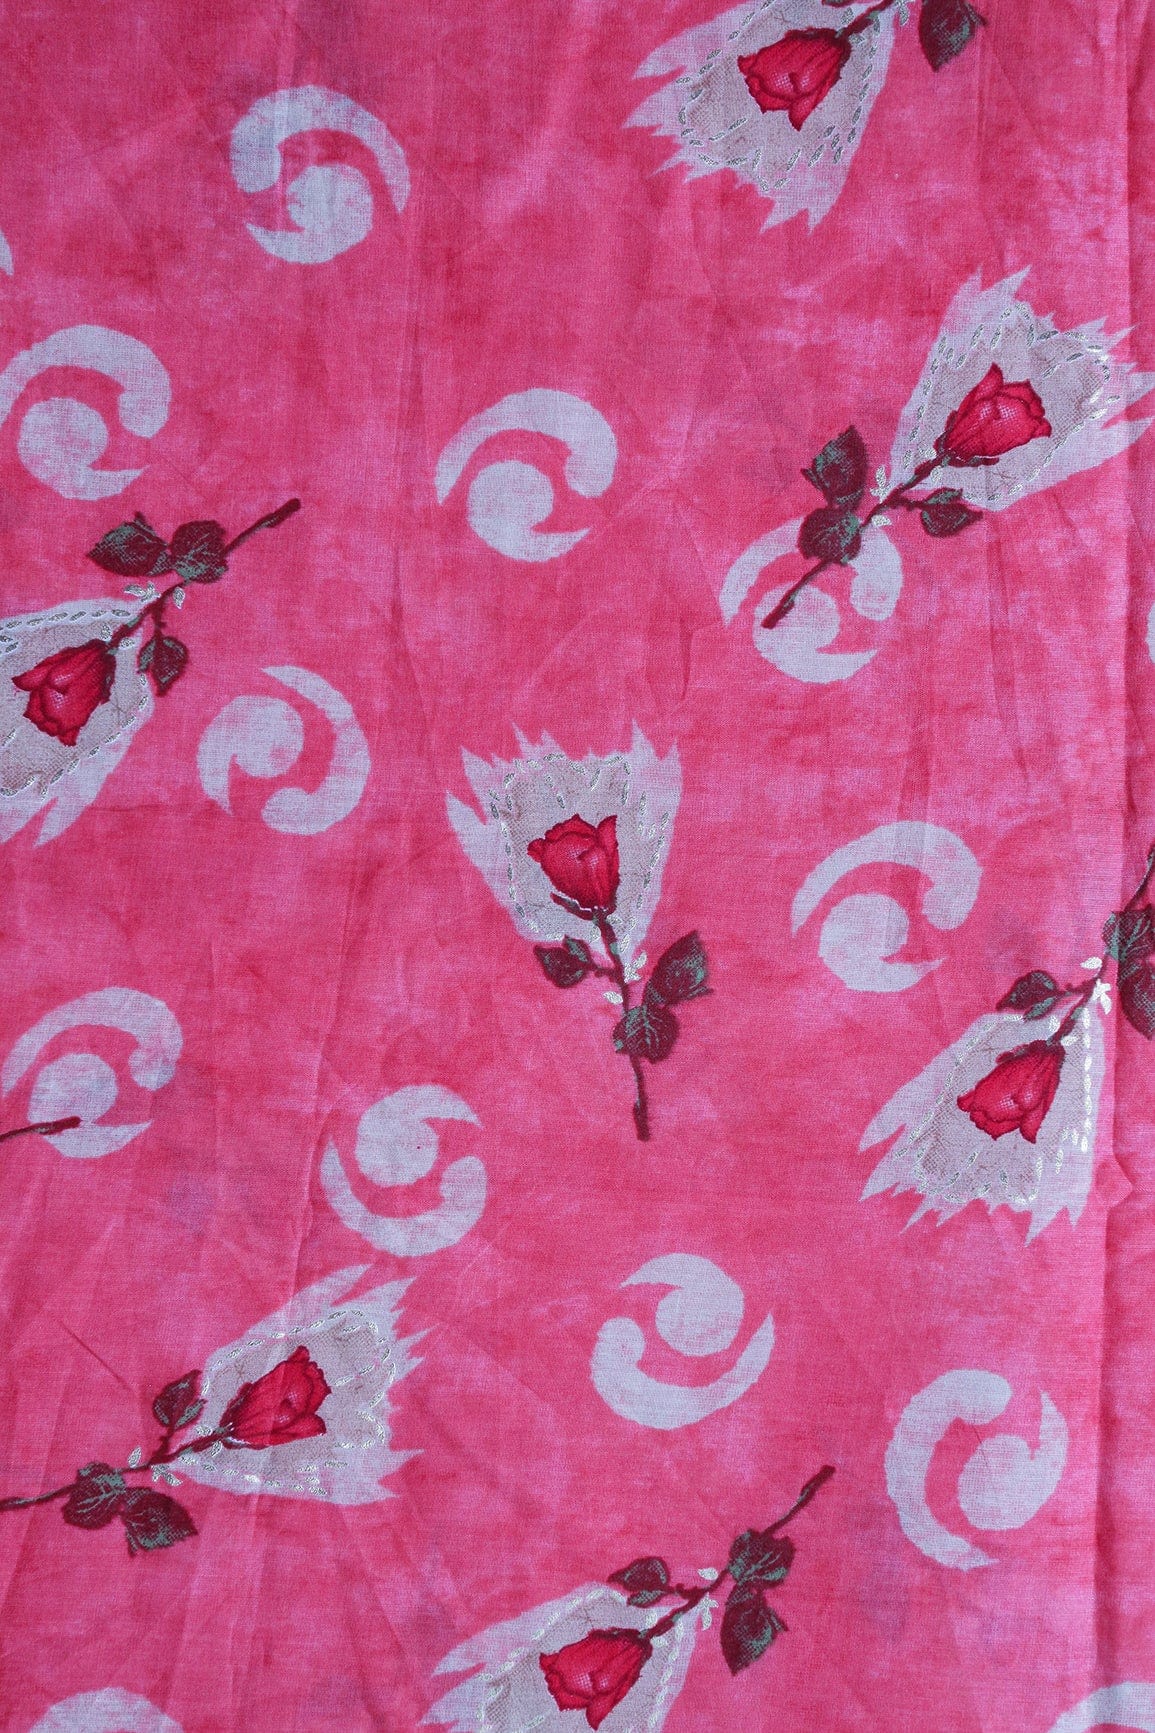 doeraa Prints Watermelon Pink And Beige Color Floral Foil Print On Pure Mul Cotton Fabric